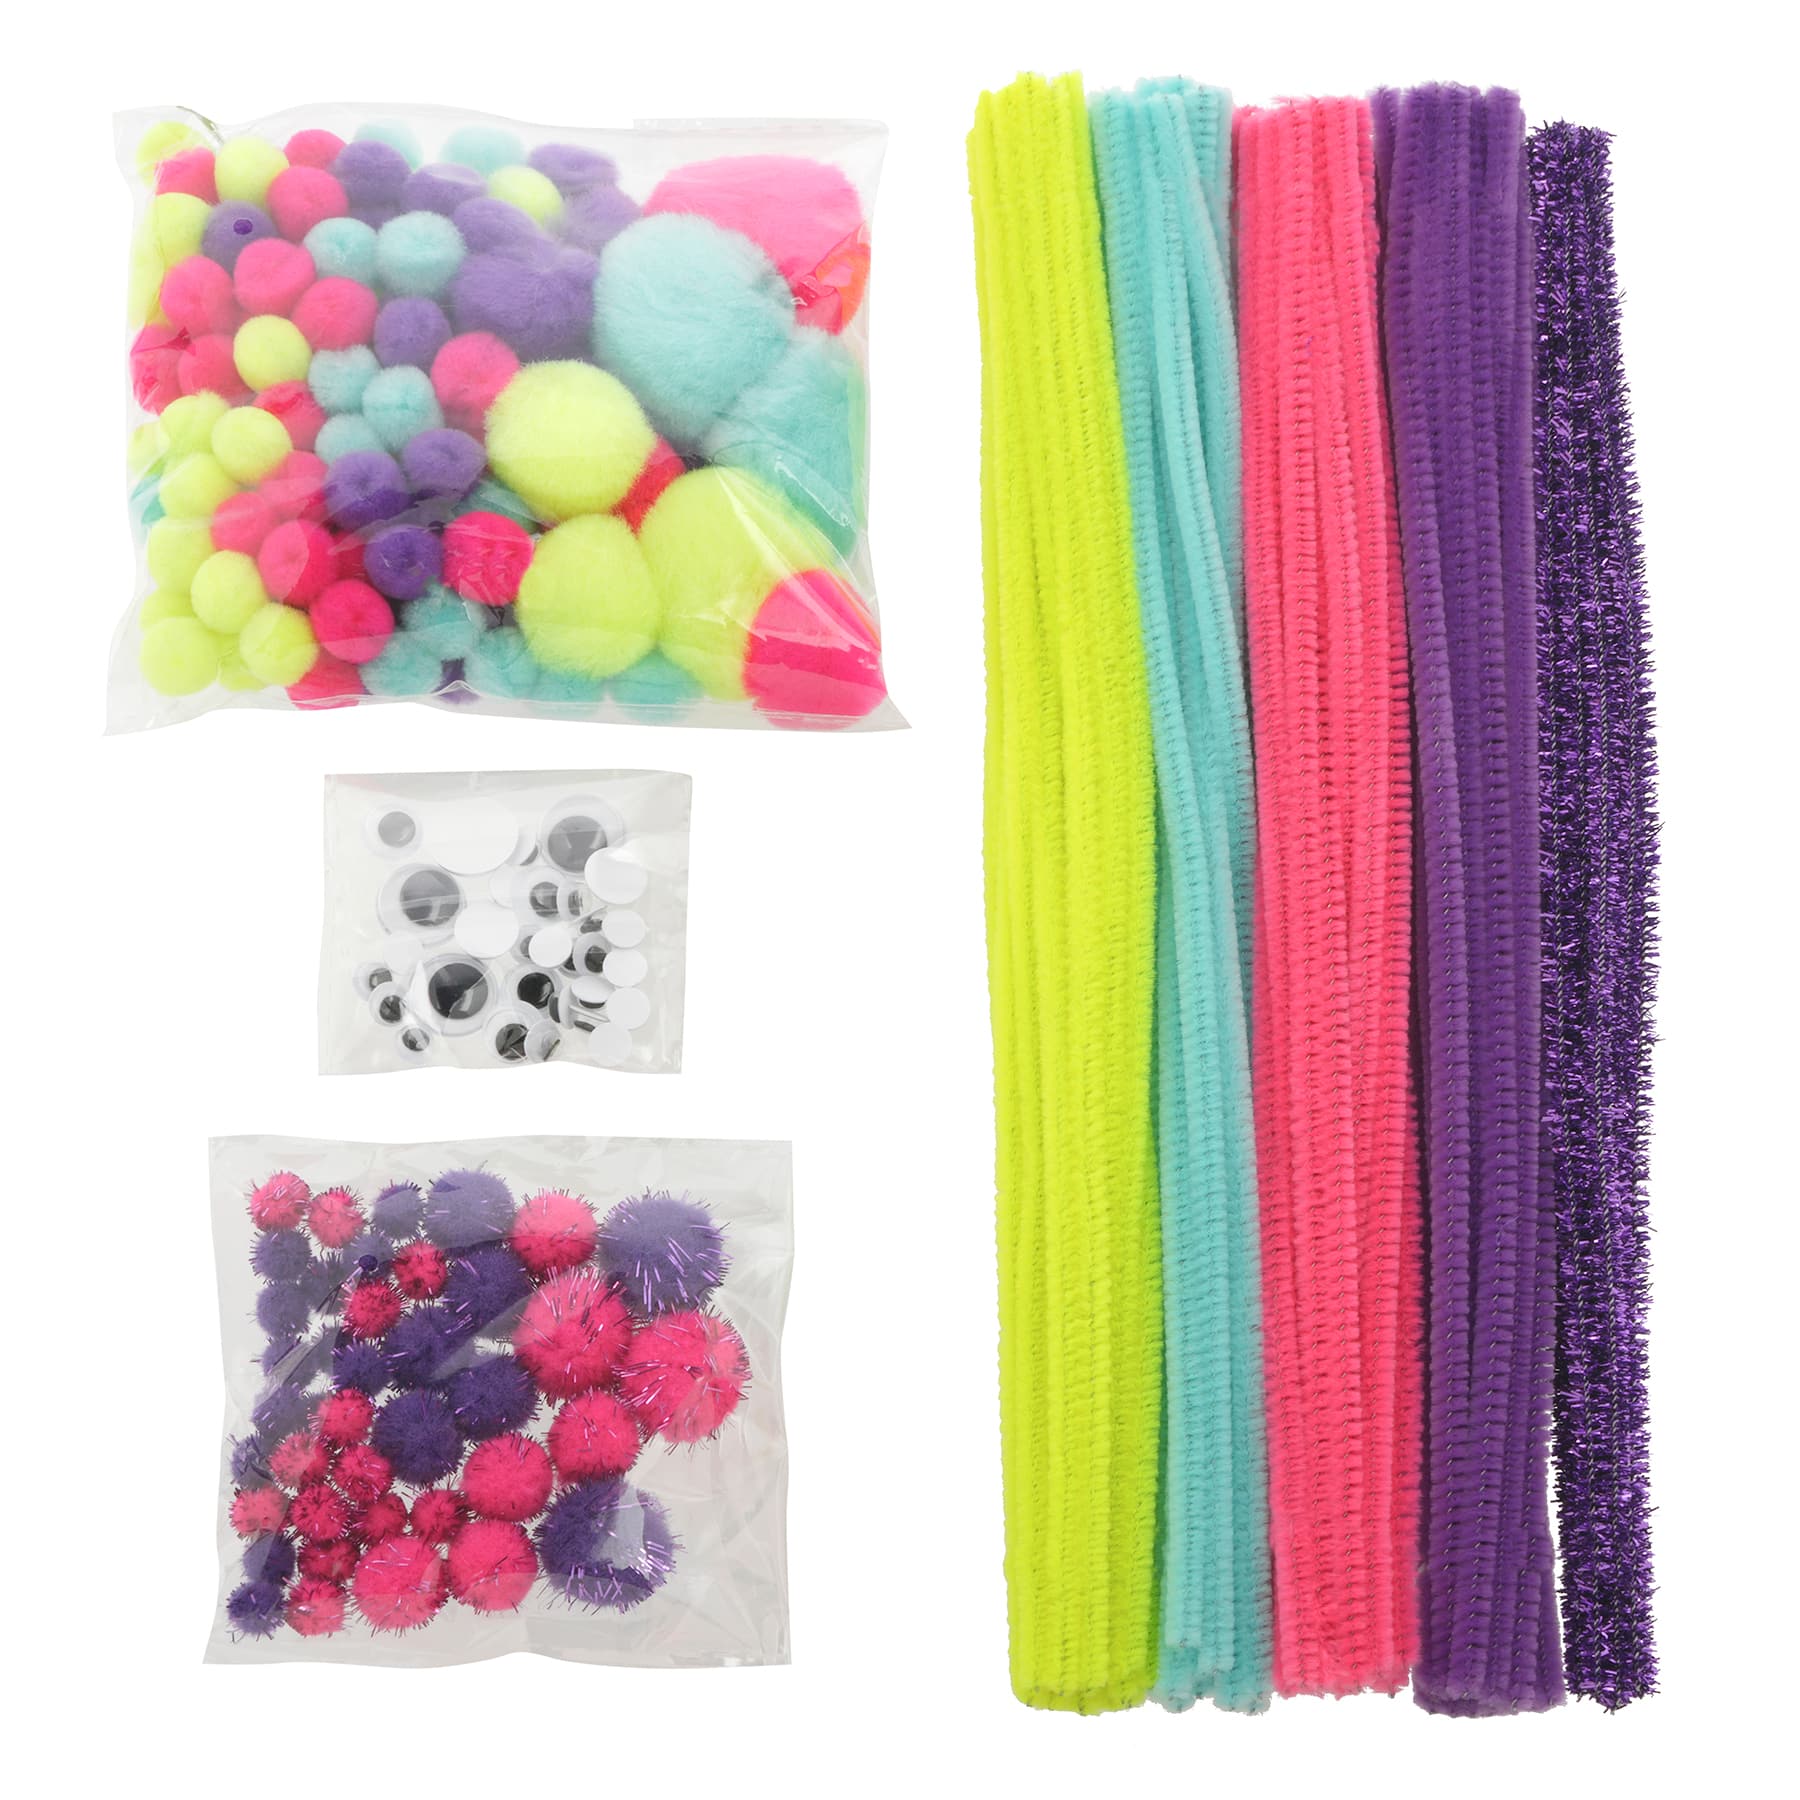 Neon Pipe Cleaners Value Pack (Pack of 120) Craft Supplies Neon